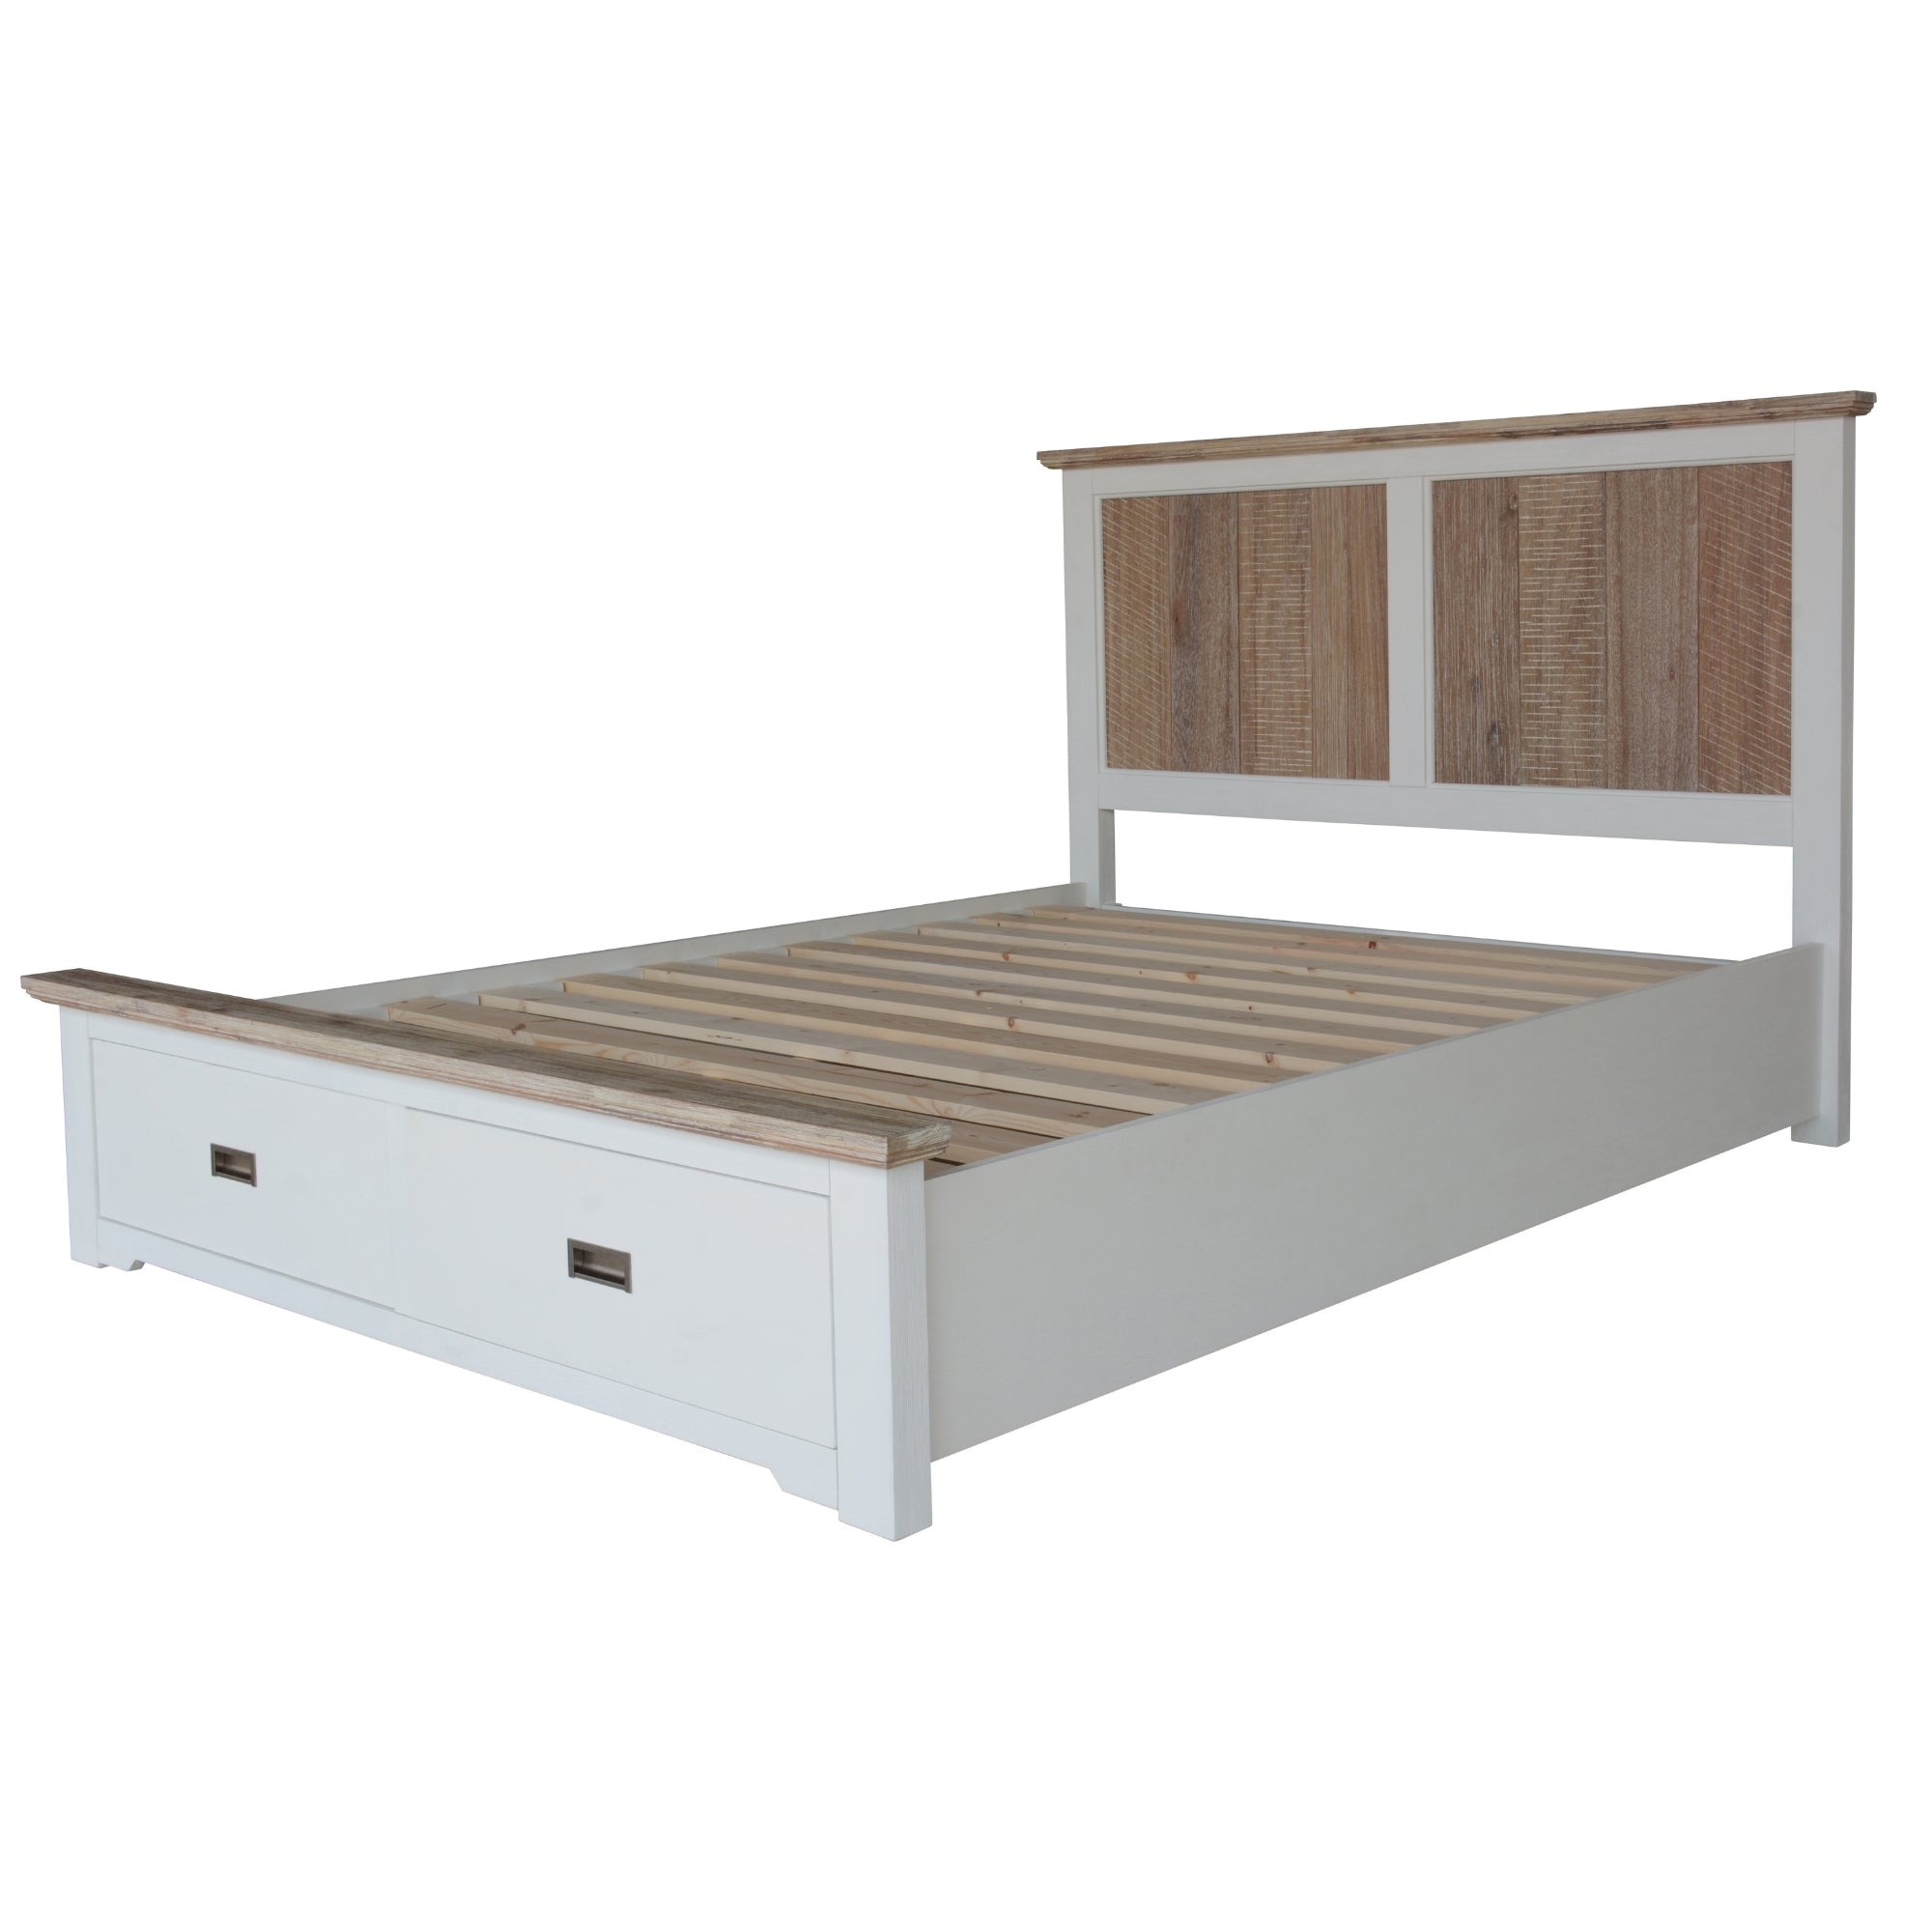 King Bed Frame, Storage Drawers, Solid Acacia Timber